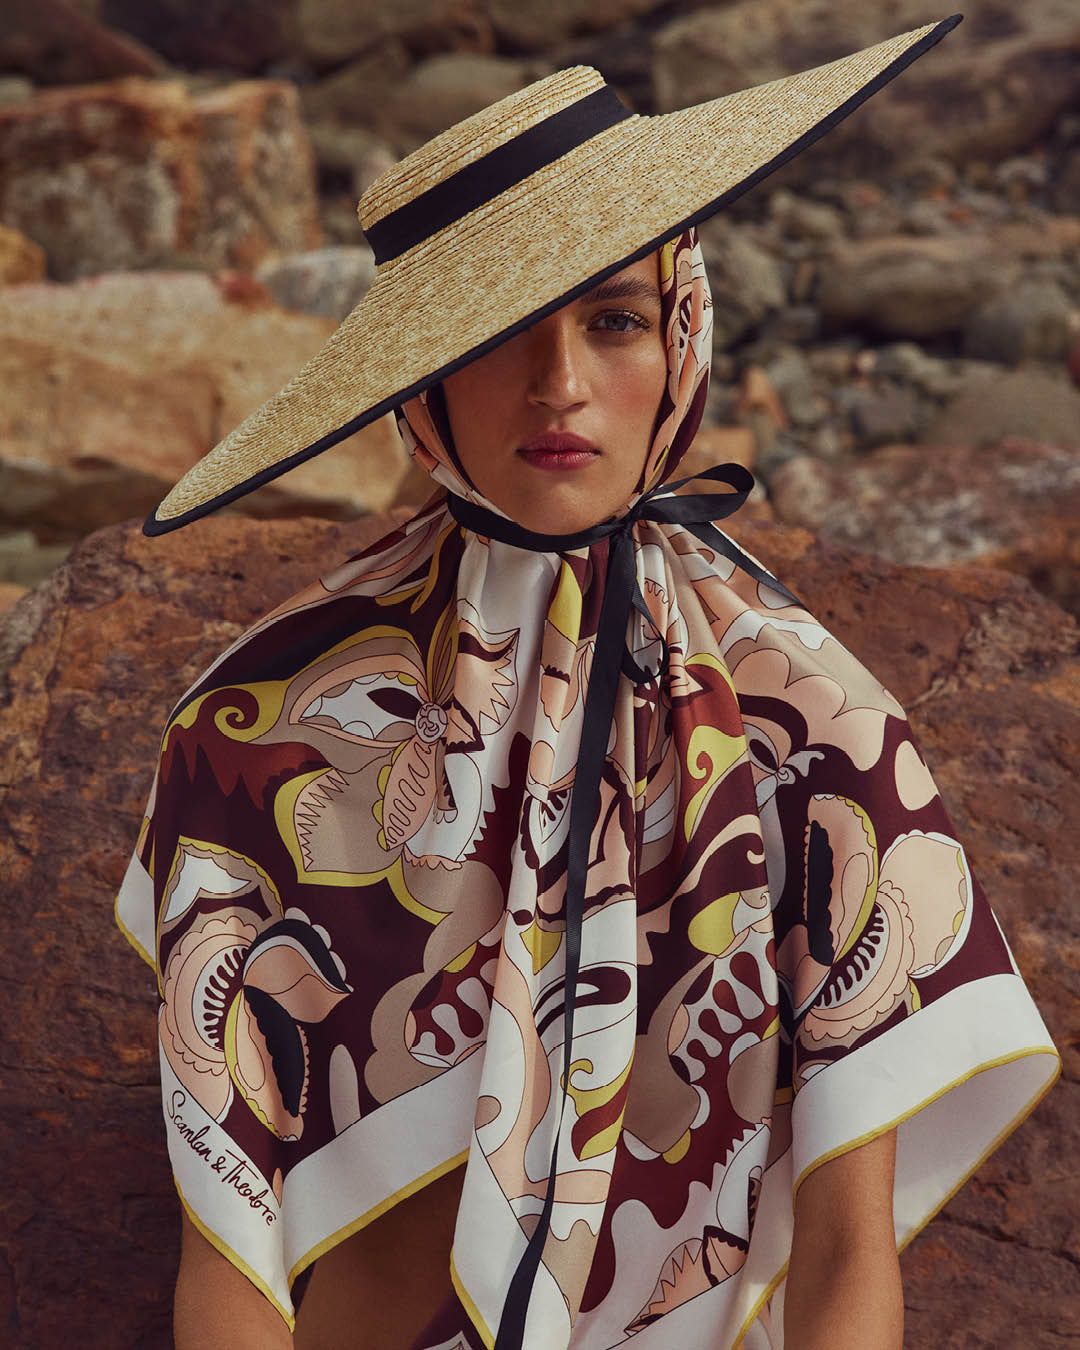 Model gazing at the camera wearing straw hat with a brown, yellow and white scarf over her head and shoulders